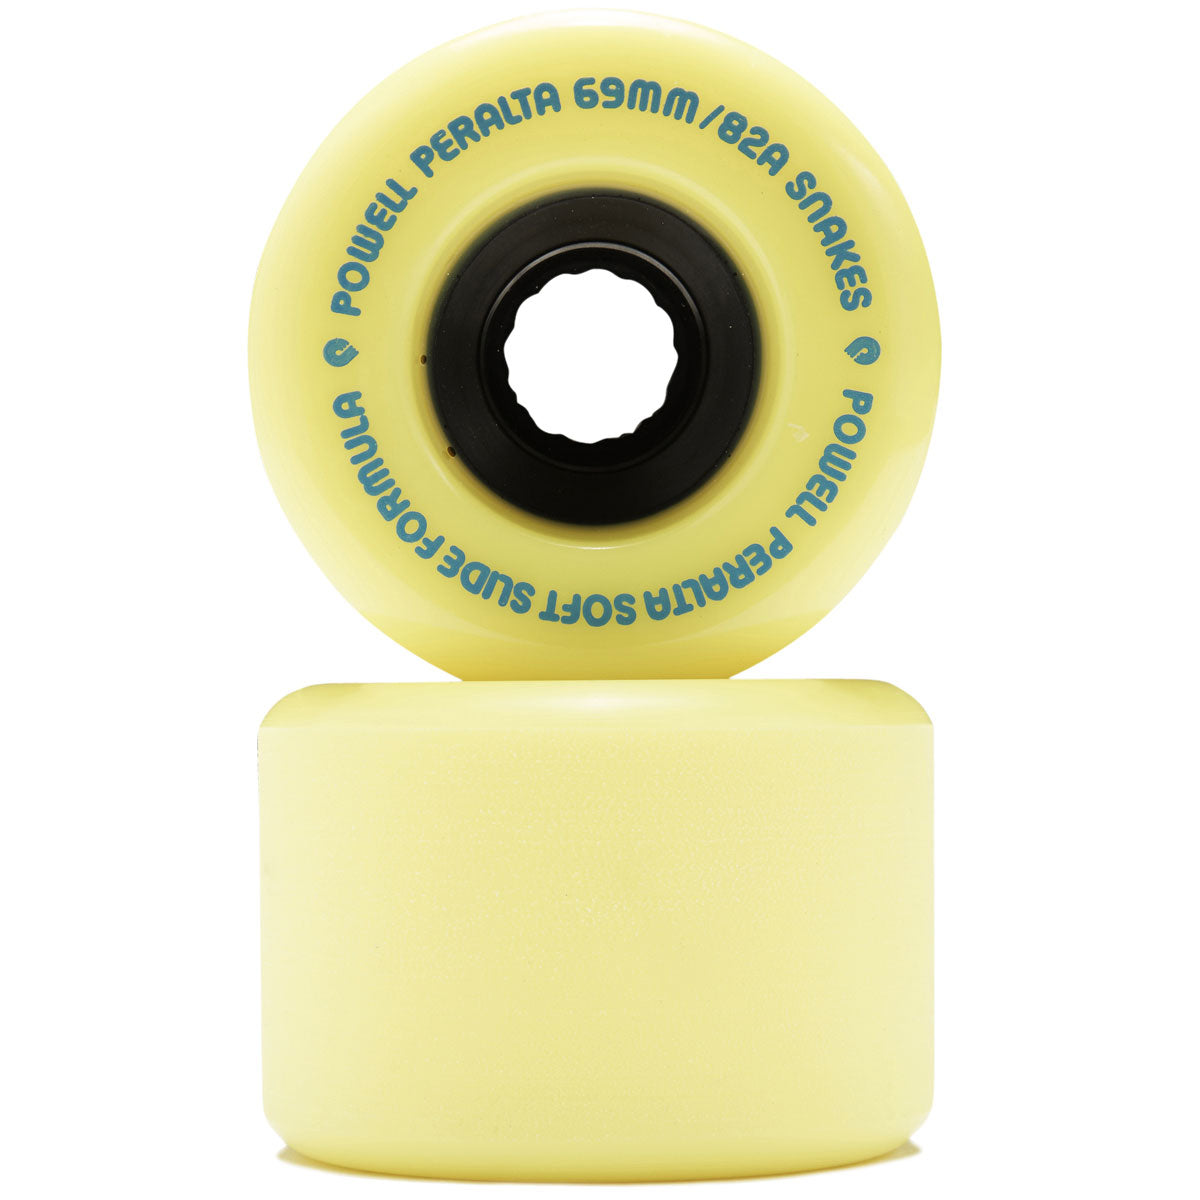 Powell-Peralta Snakes 82A Longboard Wheels - Yellow - 69mm image 2